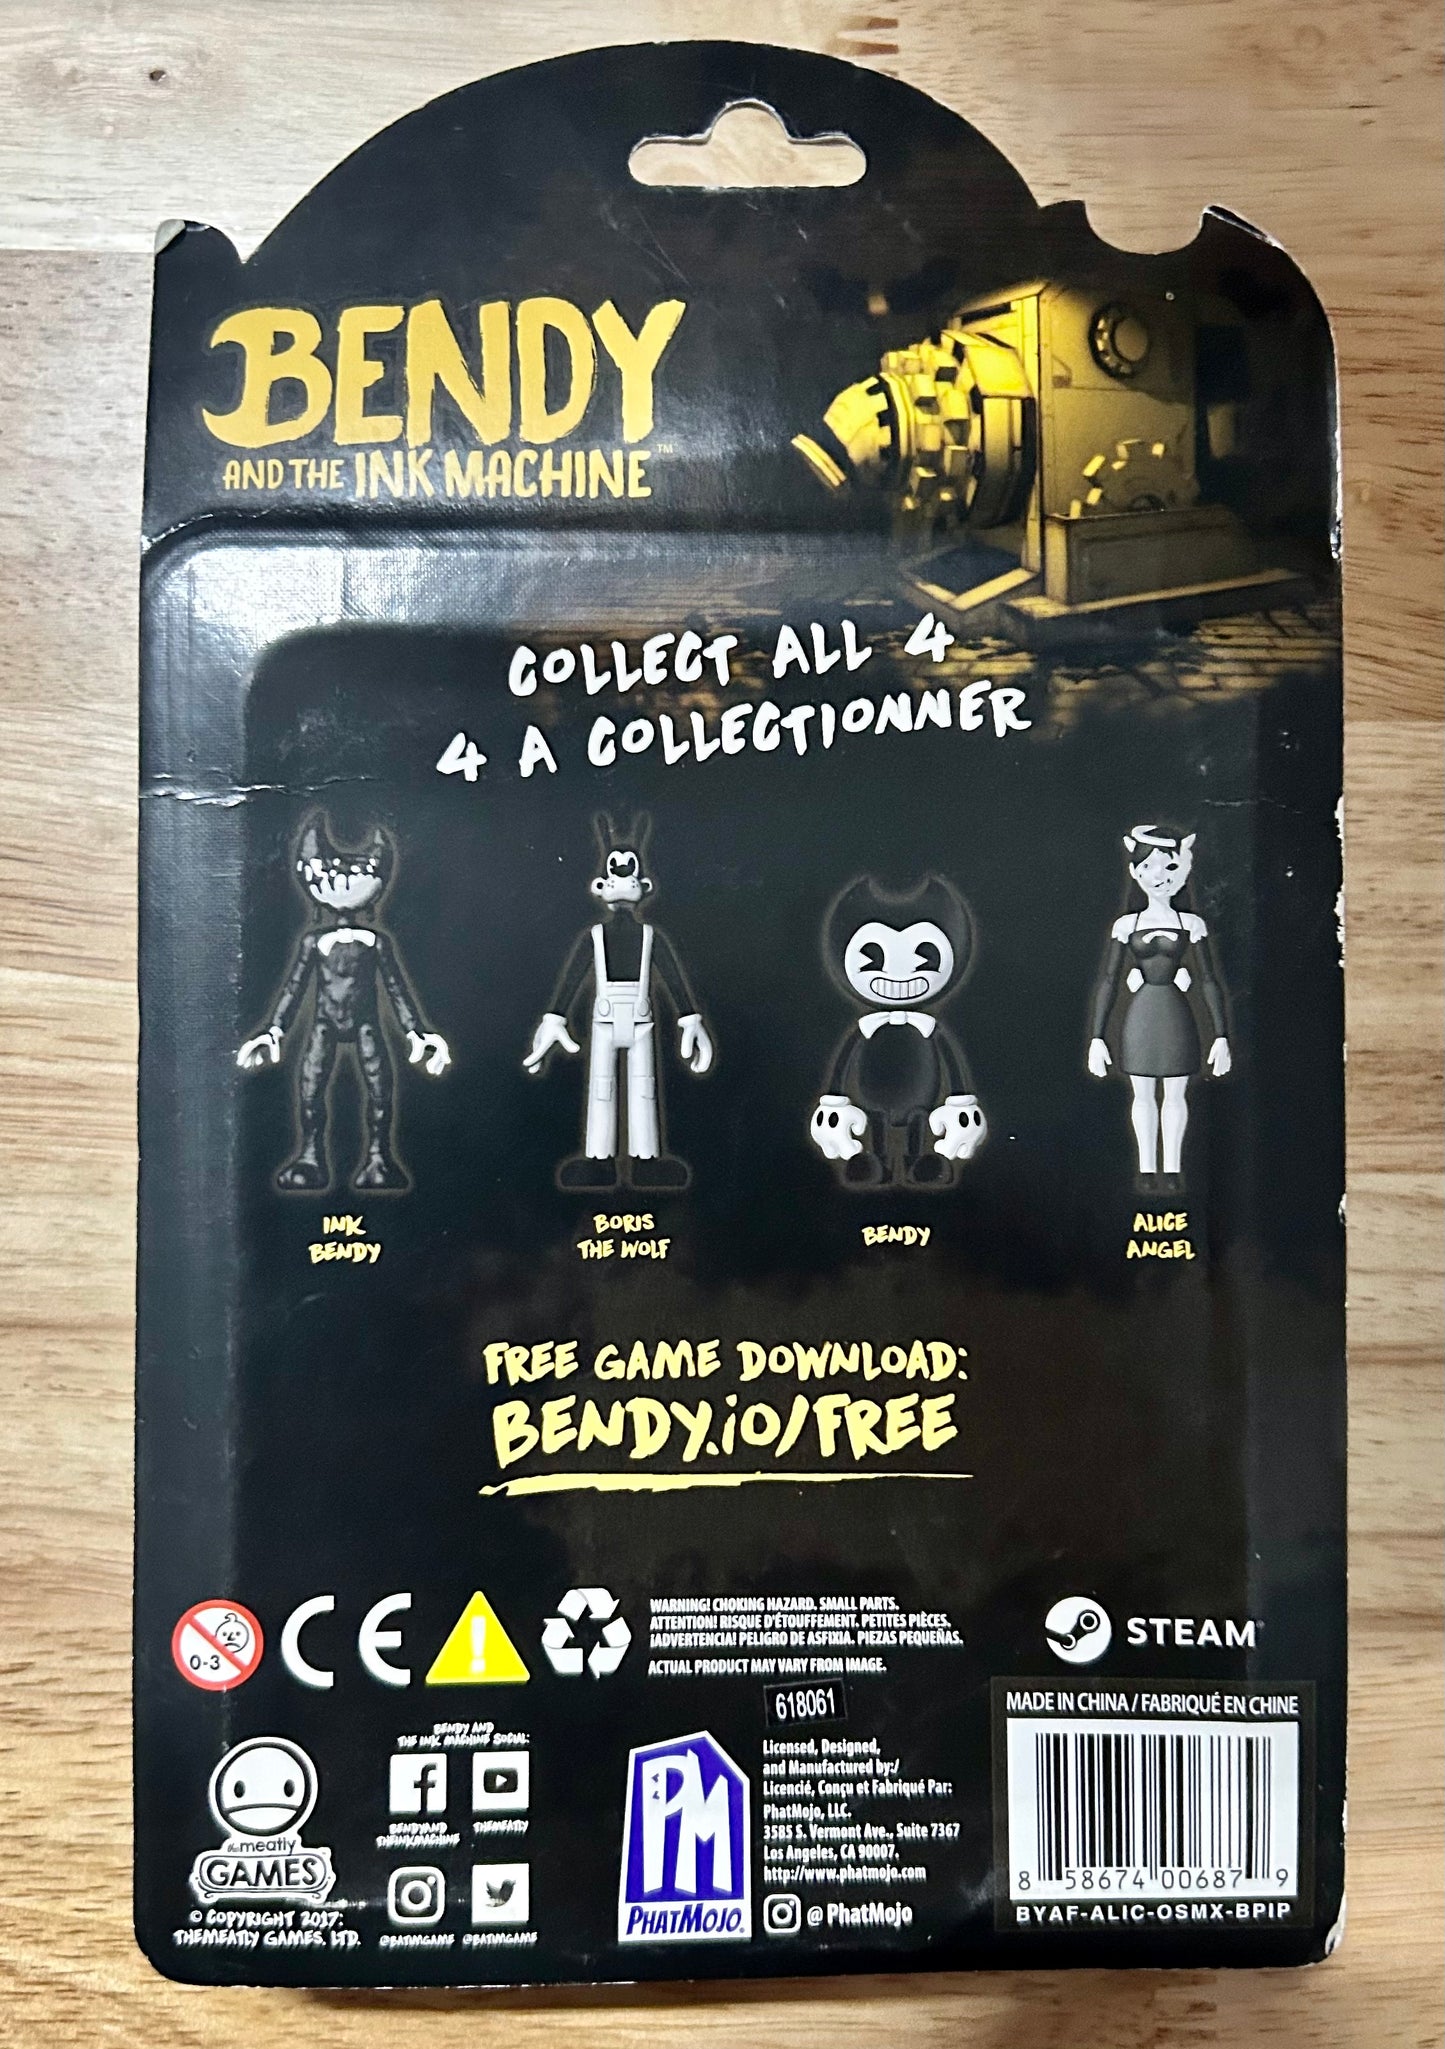 Bendy and the Ink Machine Series 1 Alice Angel Action Figure